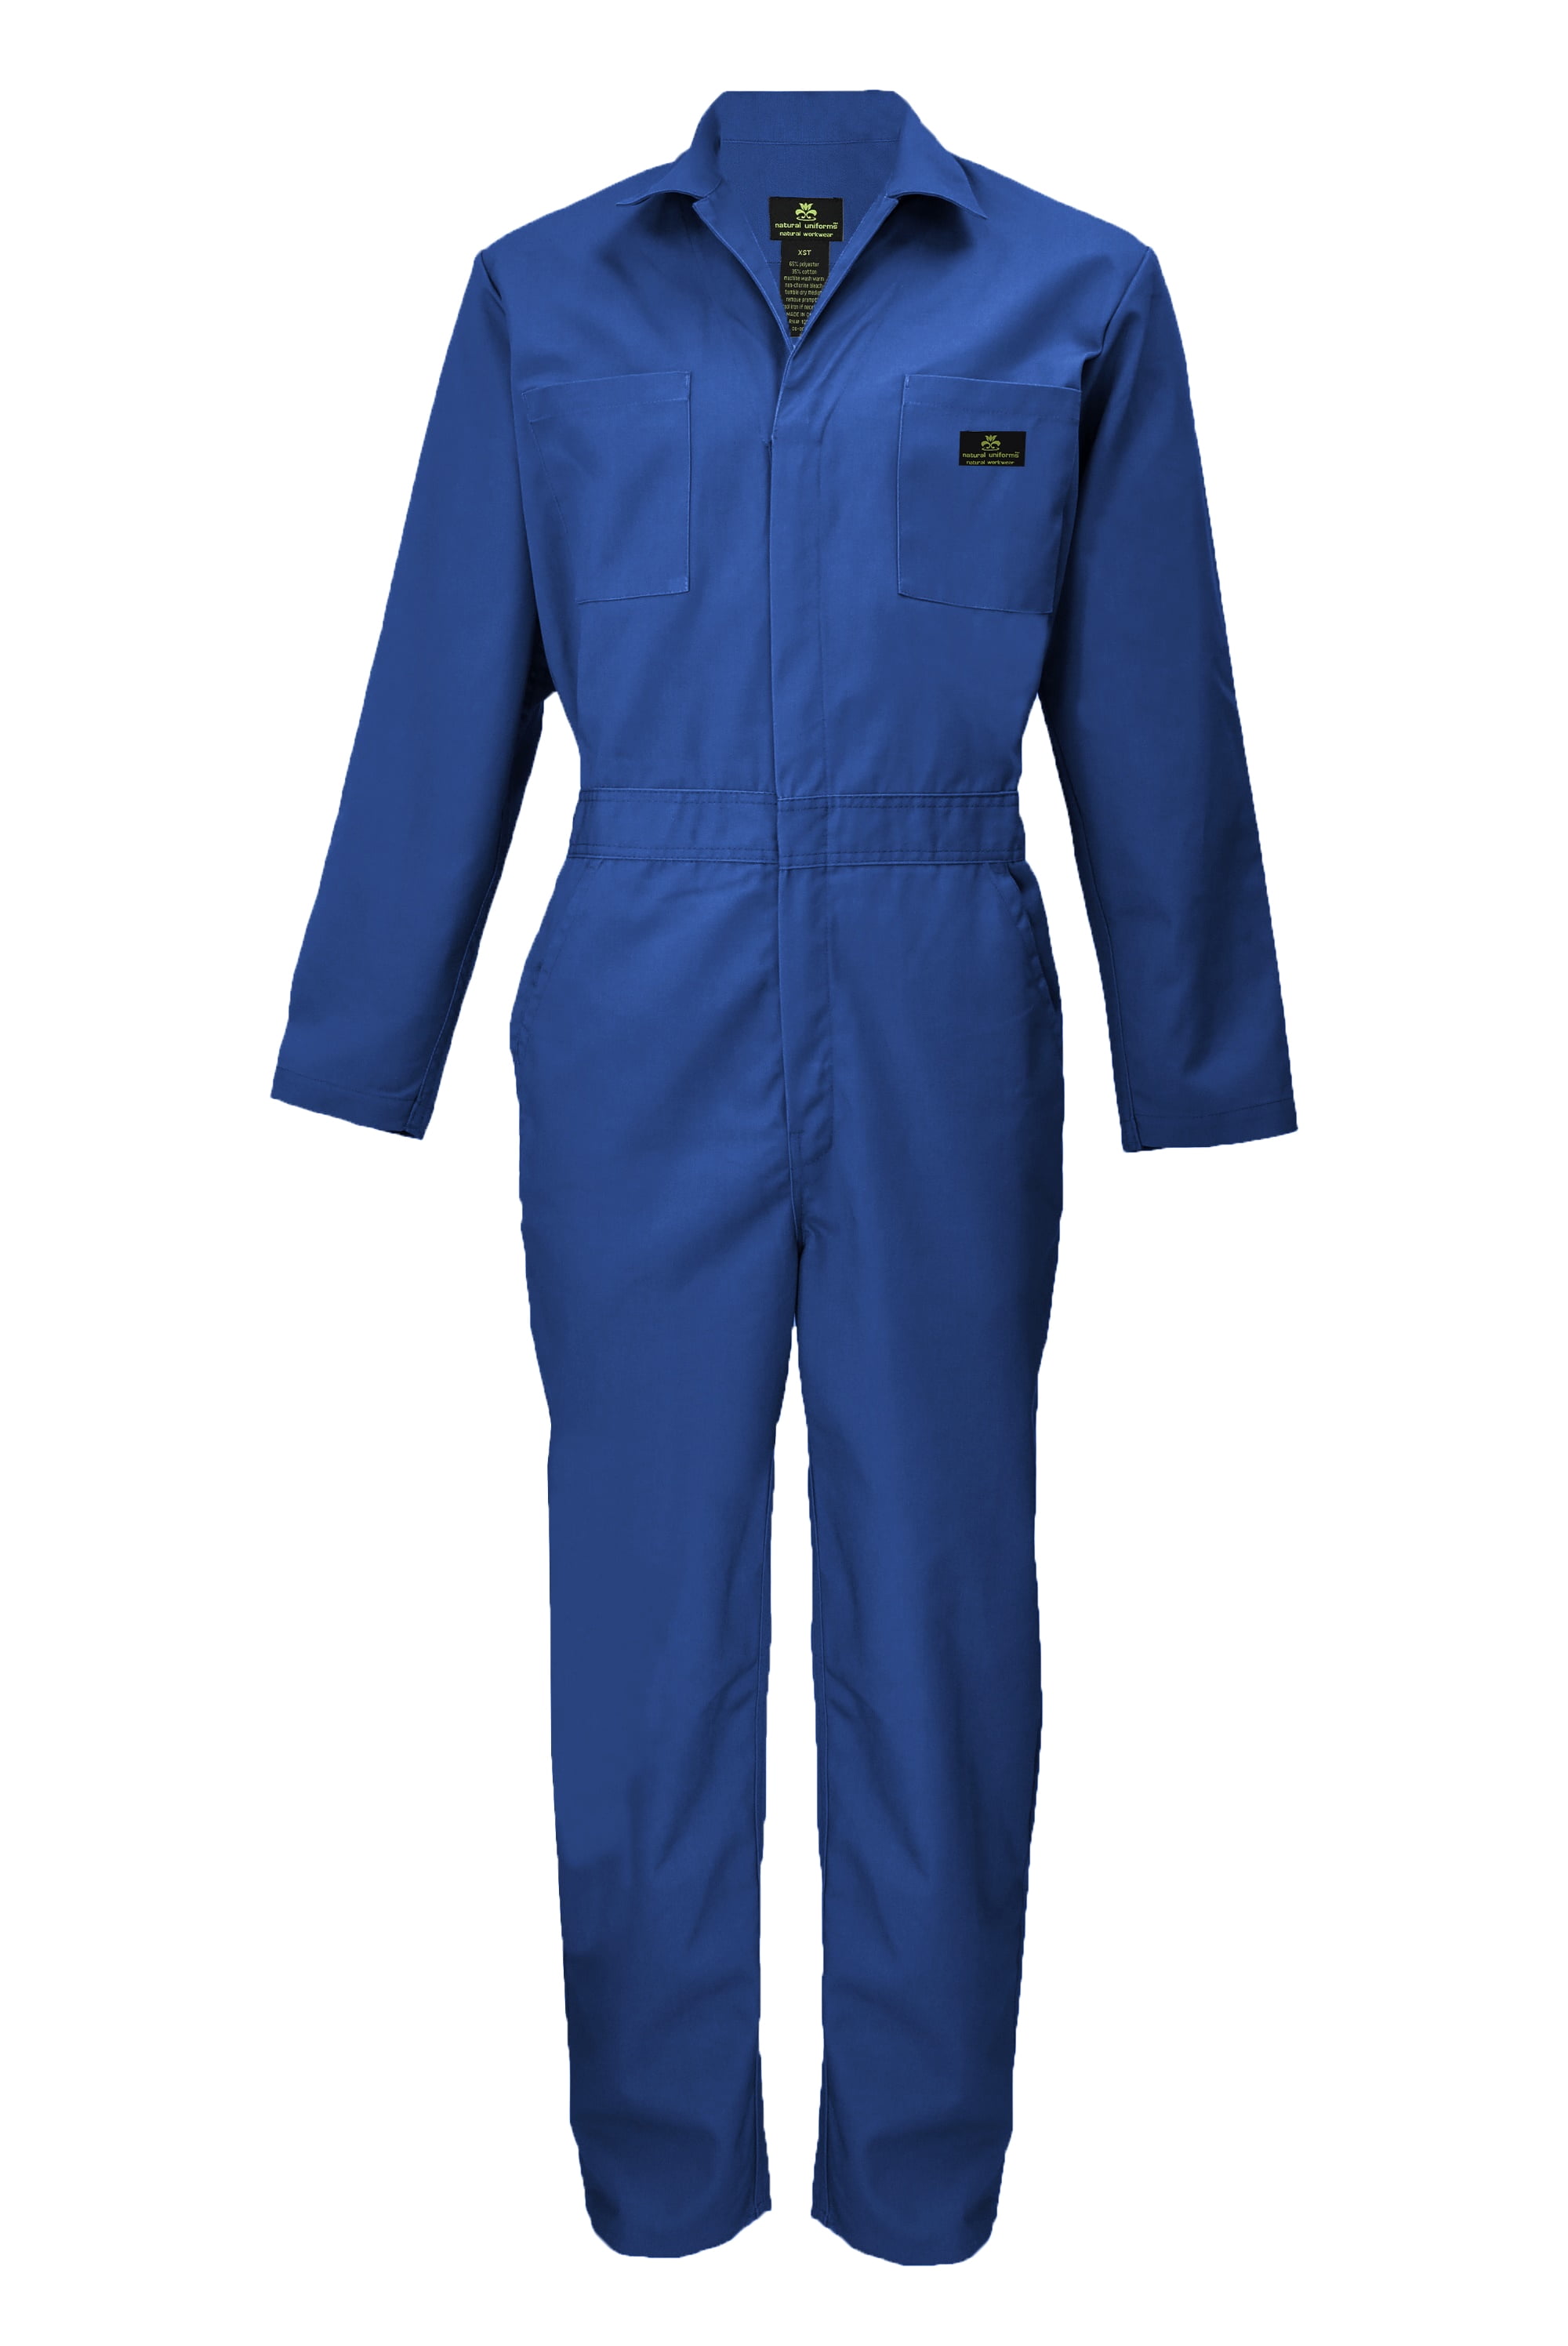 Red Kap® Men's Twill Action Back Coverall with Chest Pockets 